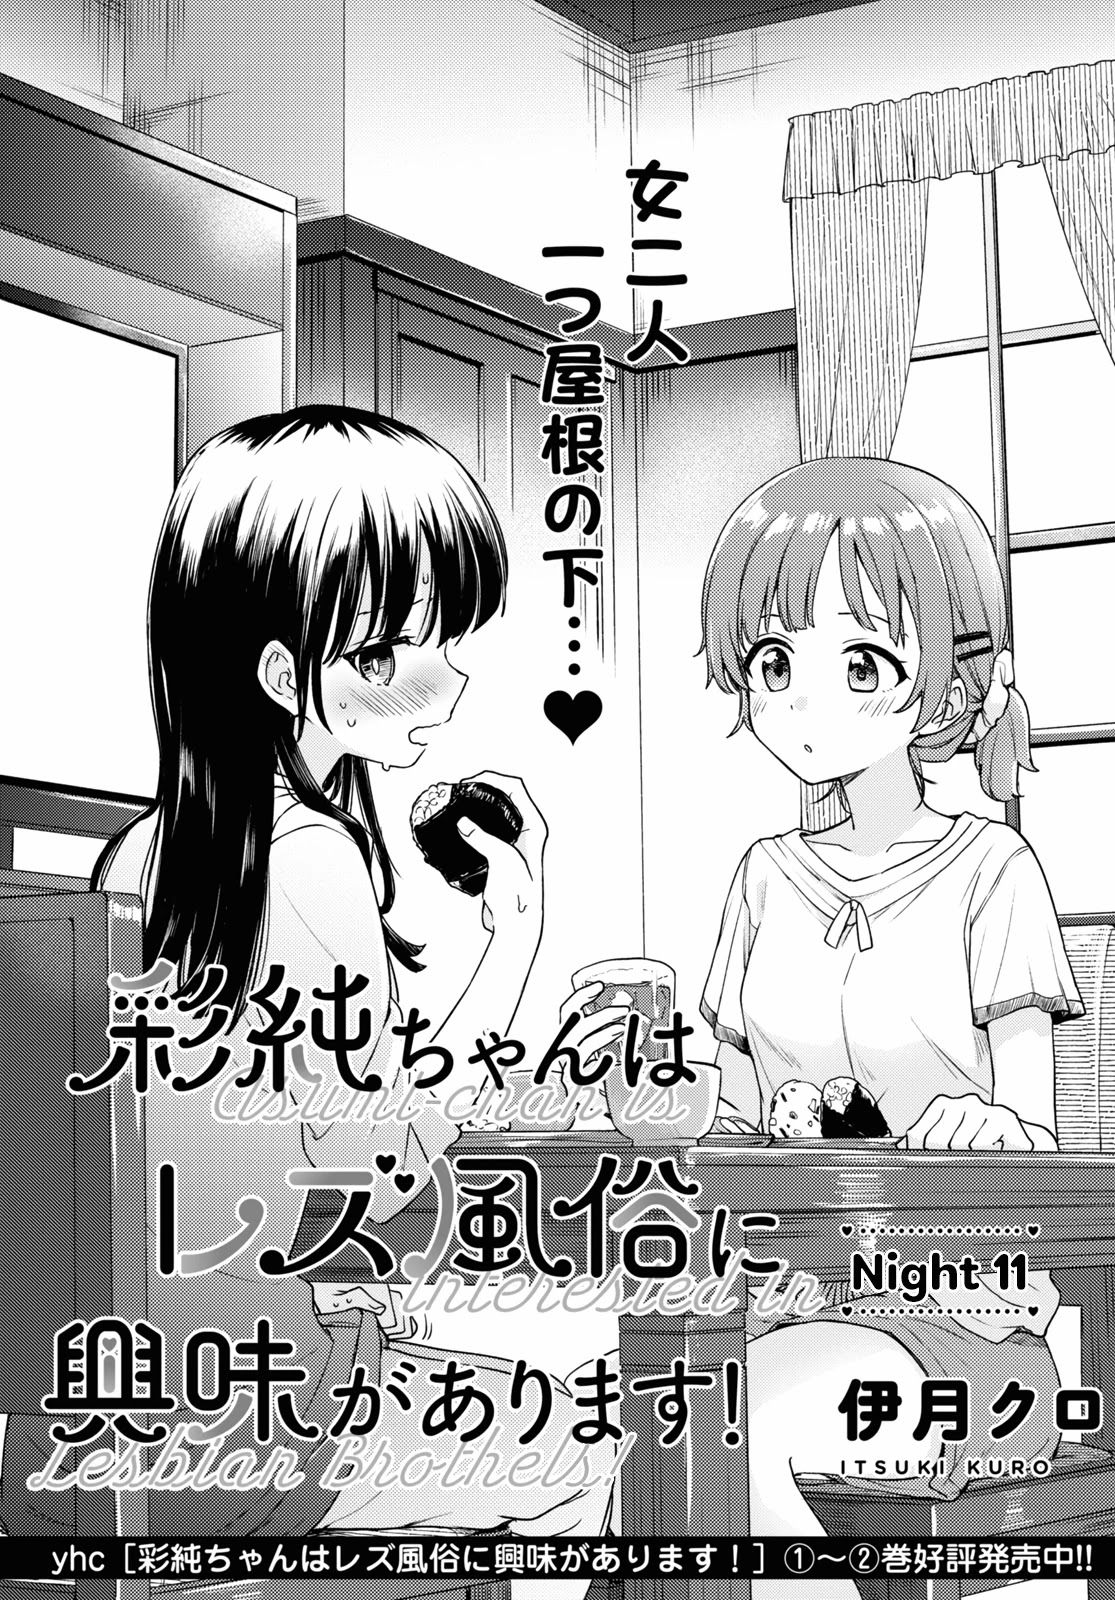 Asumi-Chan Is Interested In Lesbian Brothels! Chapter 11 #1